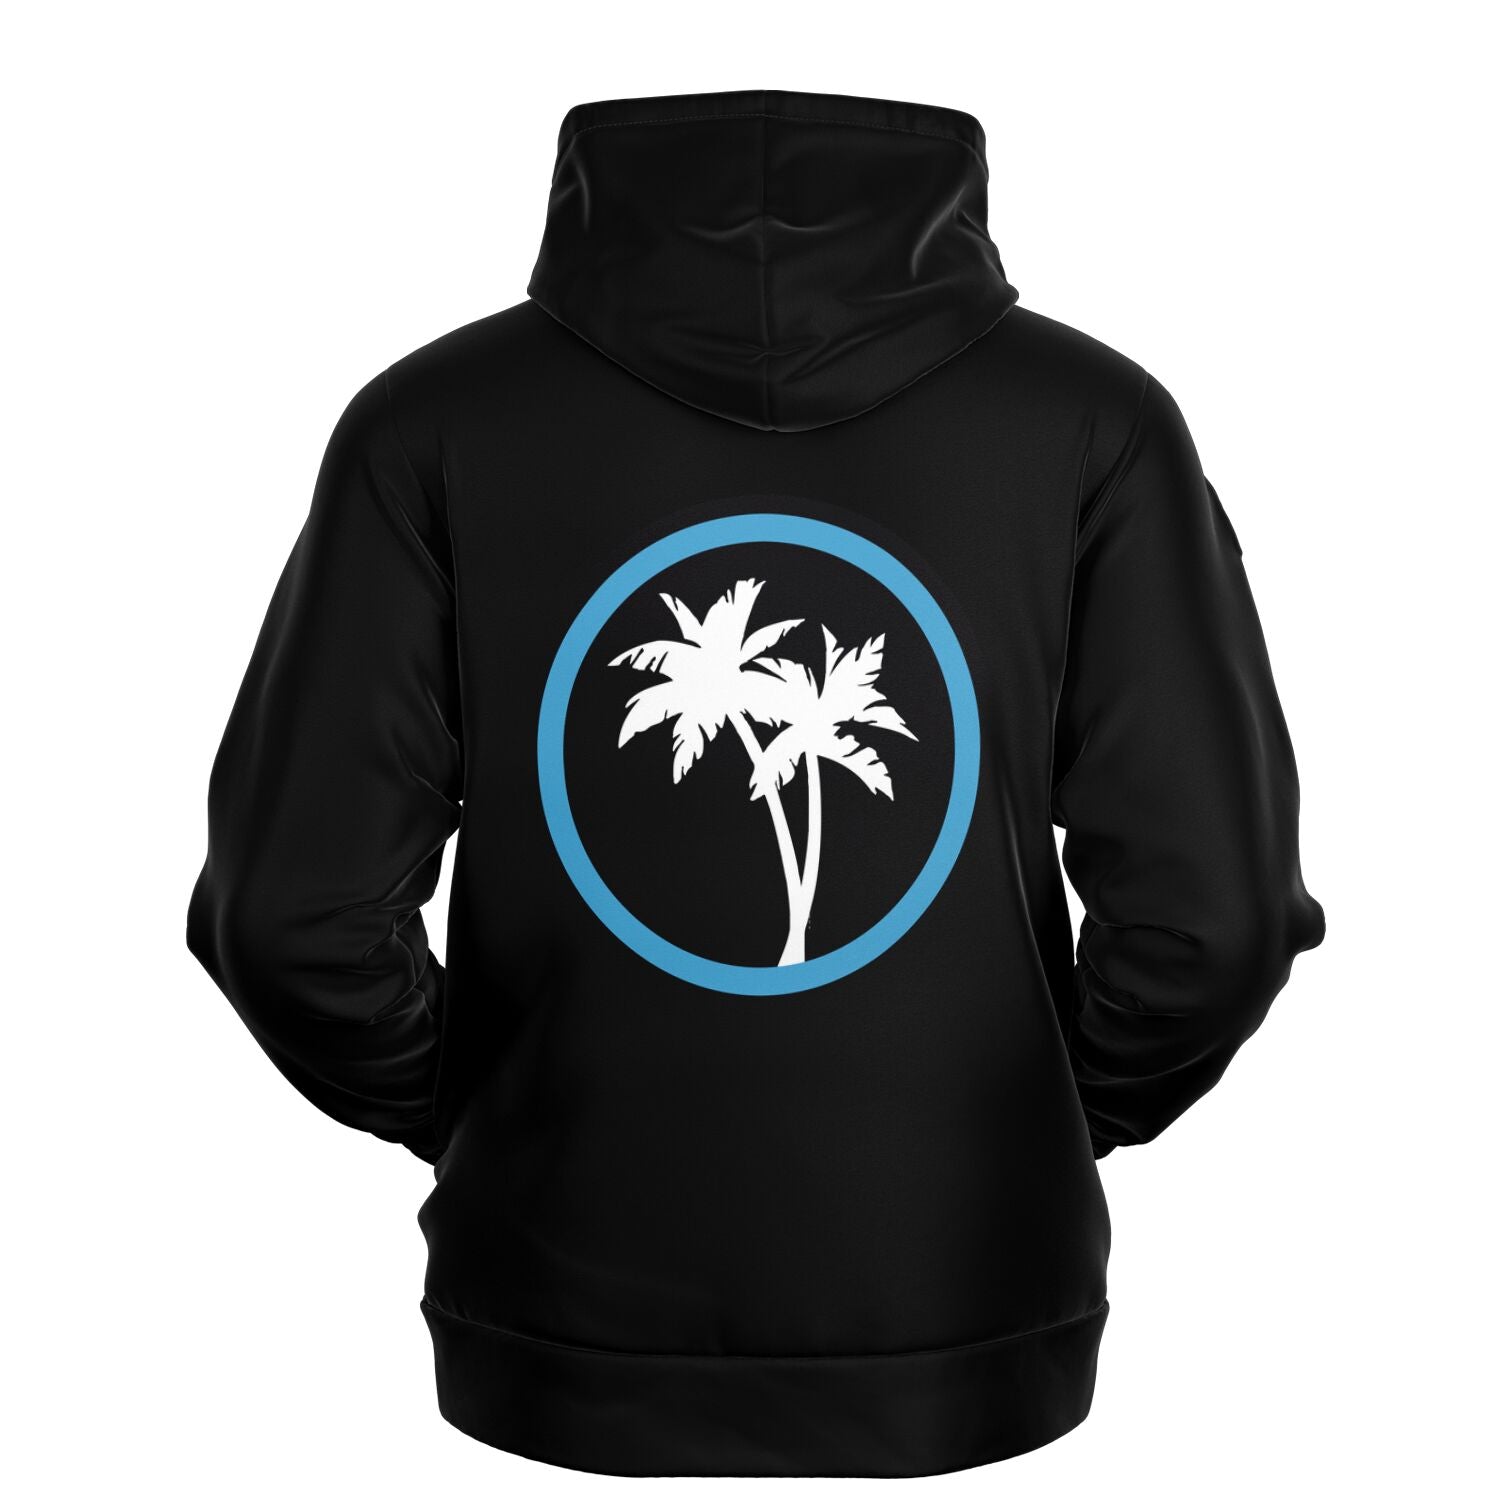 Rad Palm Icon Blue Topographic Pullover Hoodie